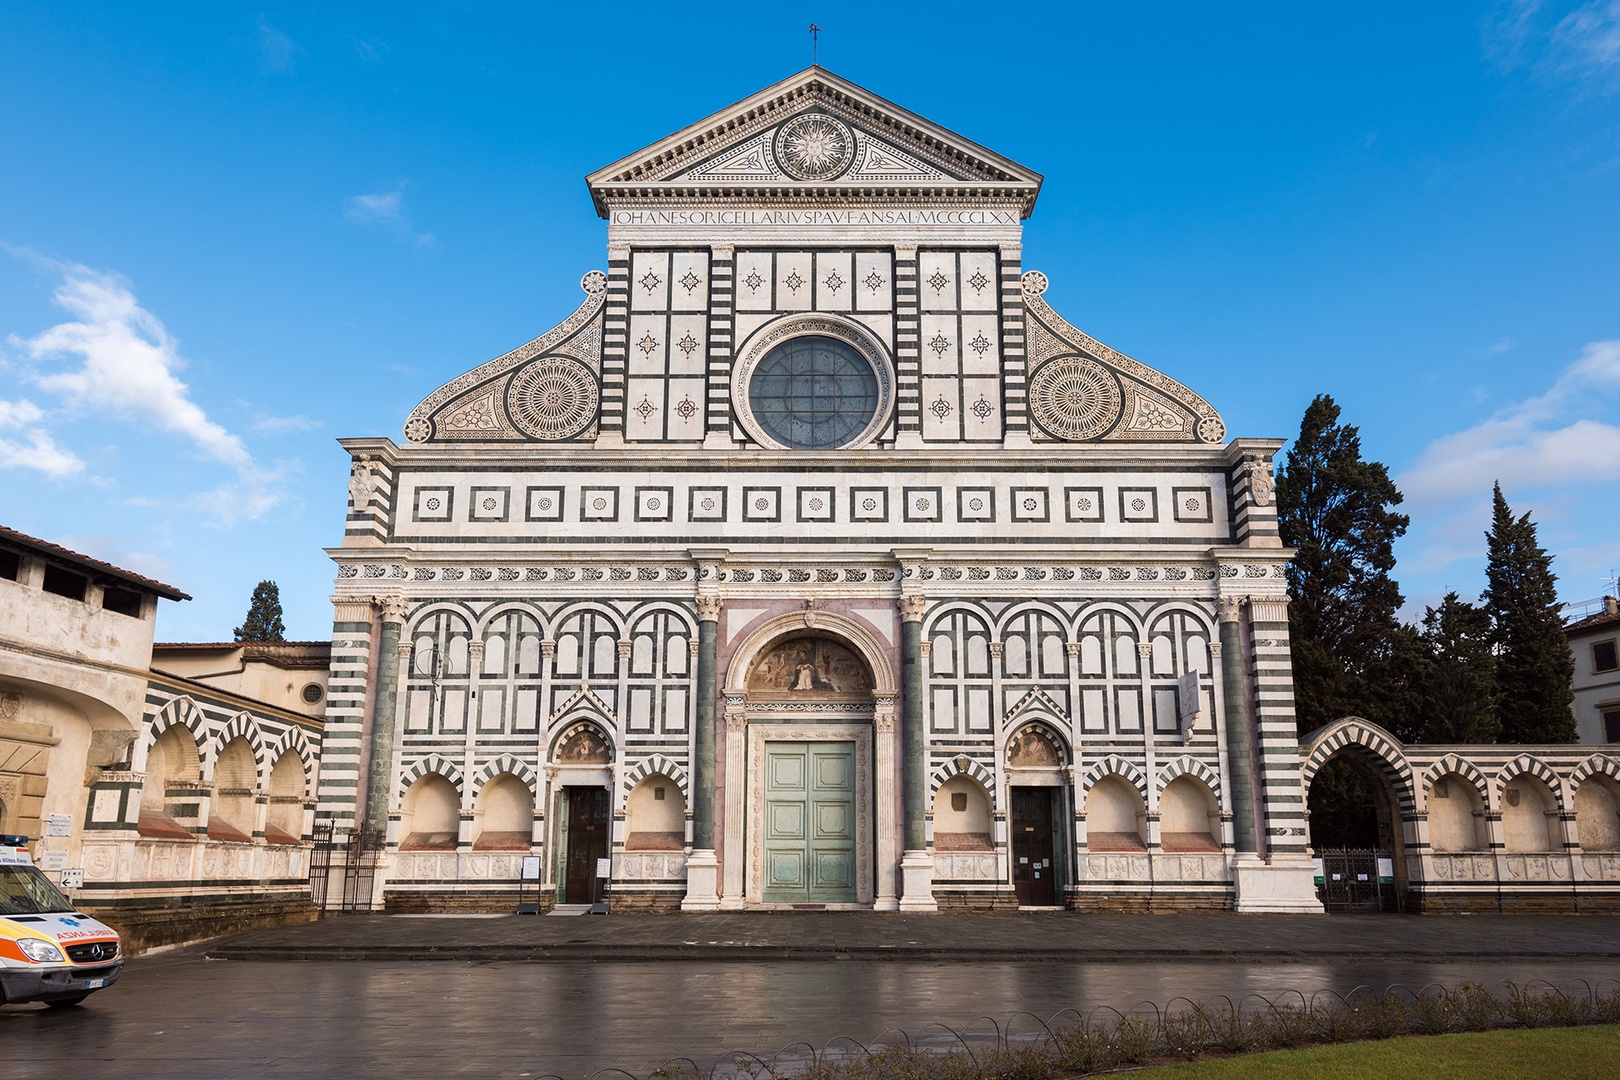 Santa Maria Novella is famous for its fascinating architecture and beautiful art.